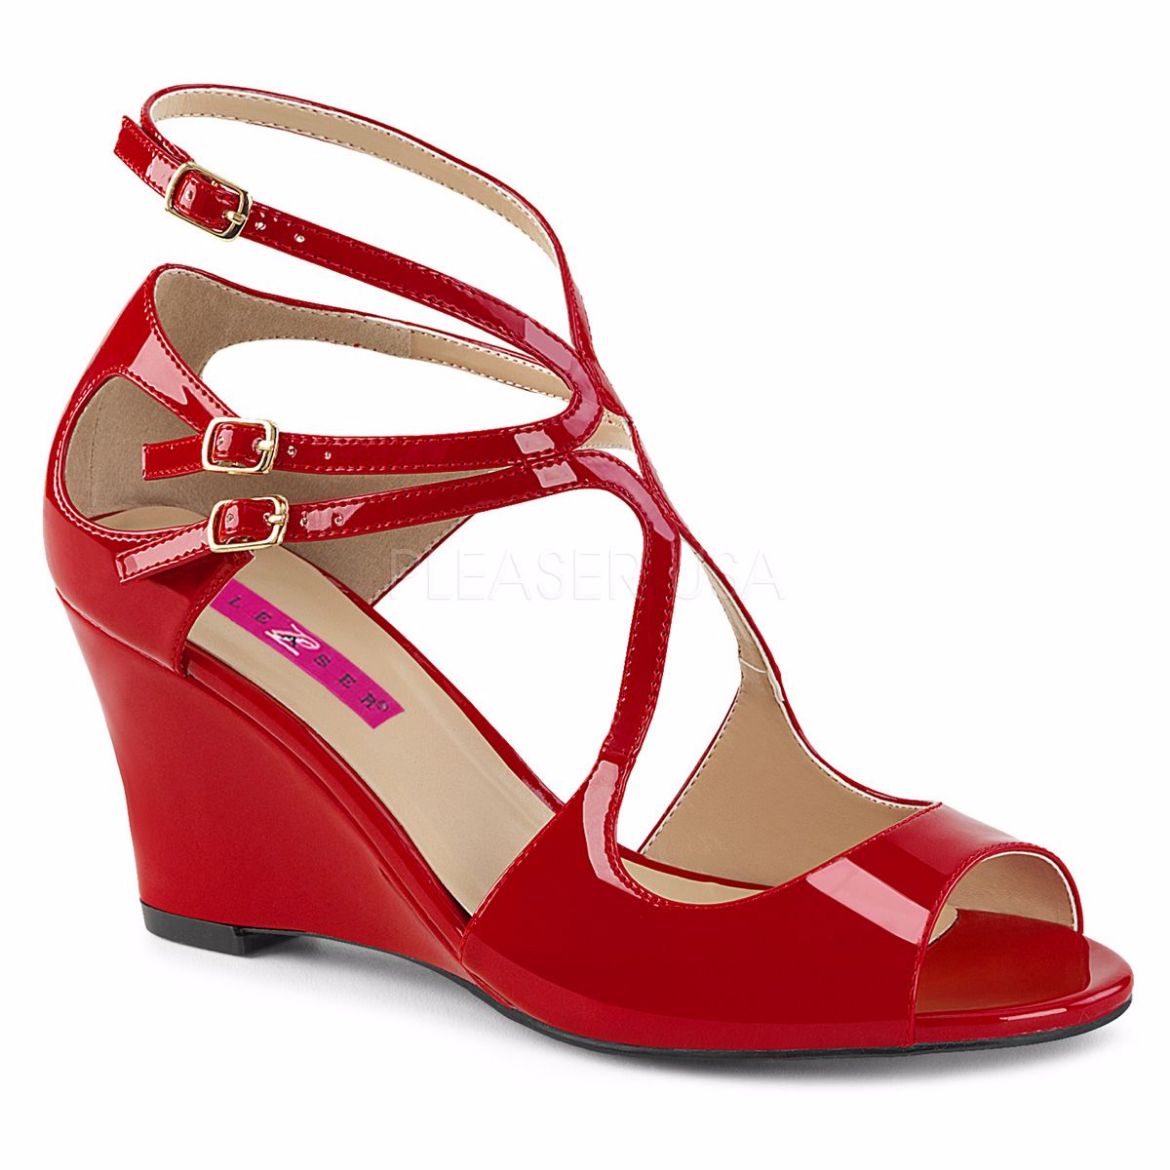 Product image of Pleaser Pink Label Kimberly-04 Red Patent, 3 inch (7.6 cm) Wedge Sandal Shoes